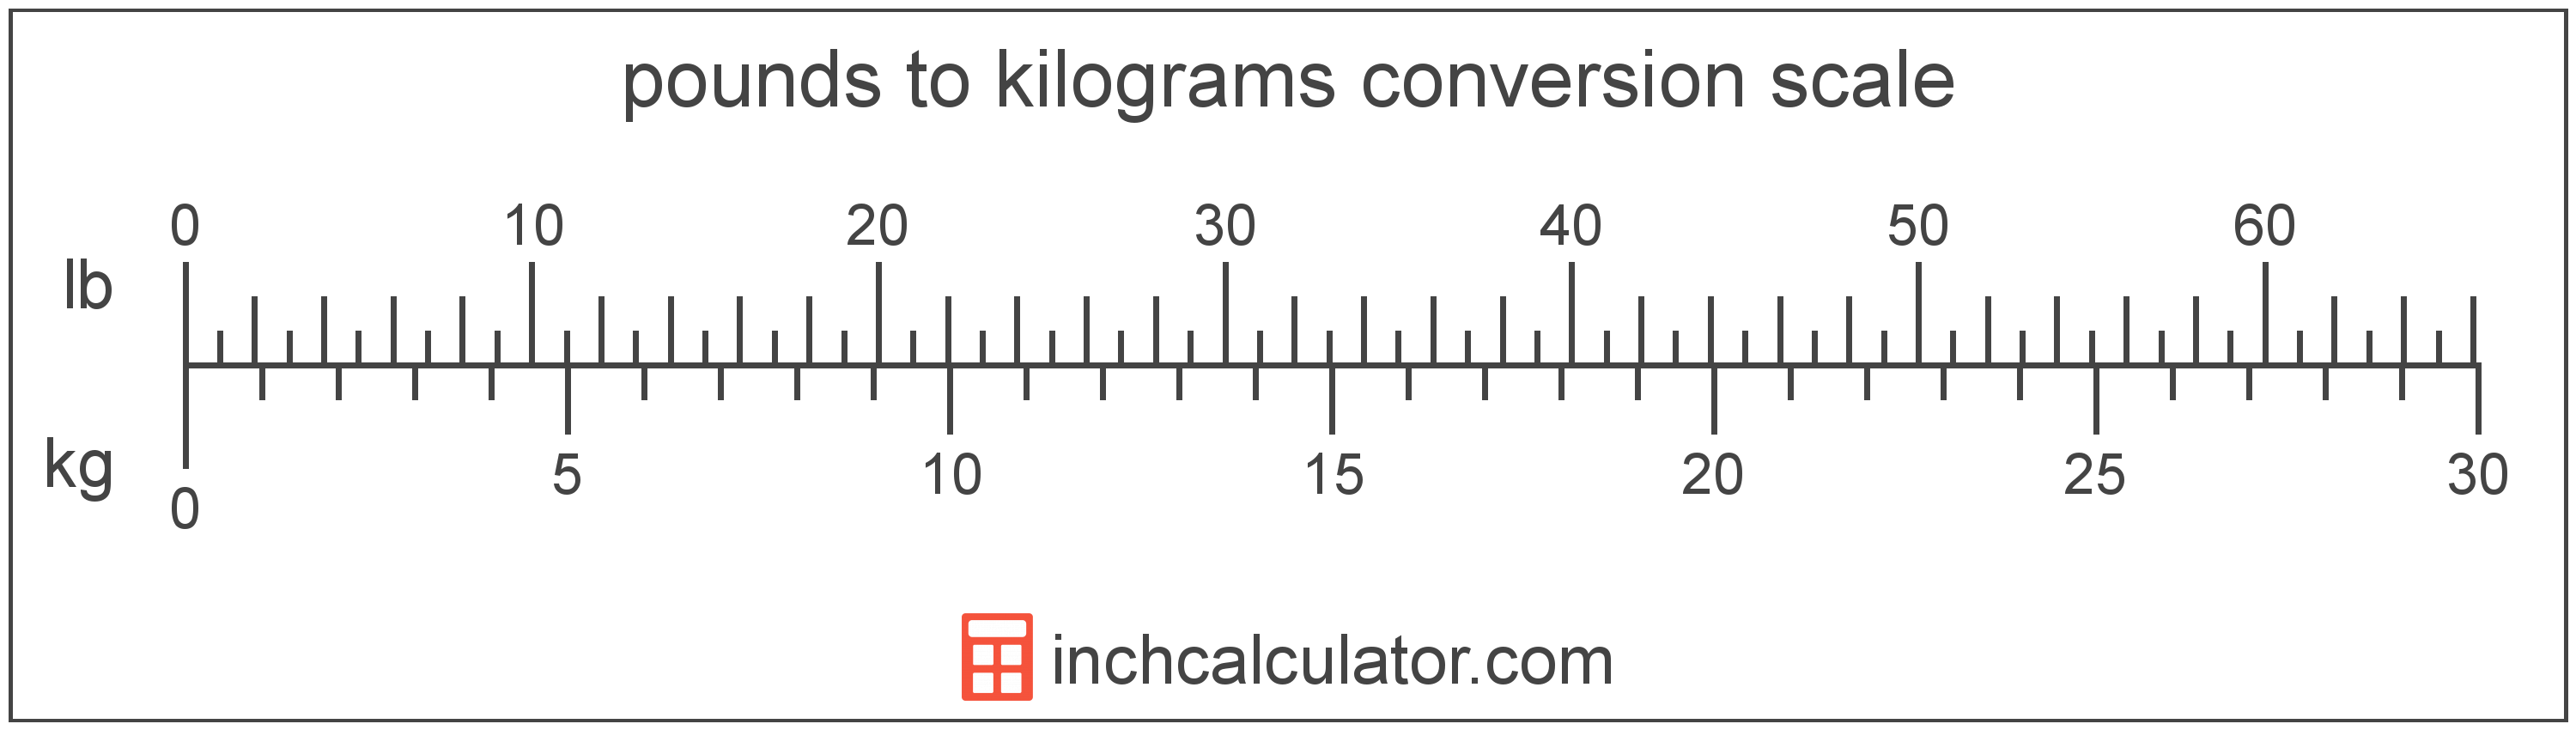 conversion scale showing weight in kilograms and equivalent value in pounds